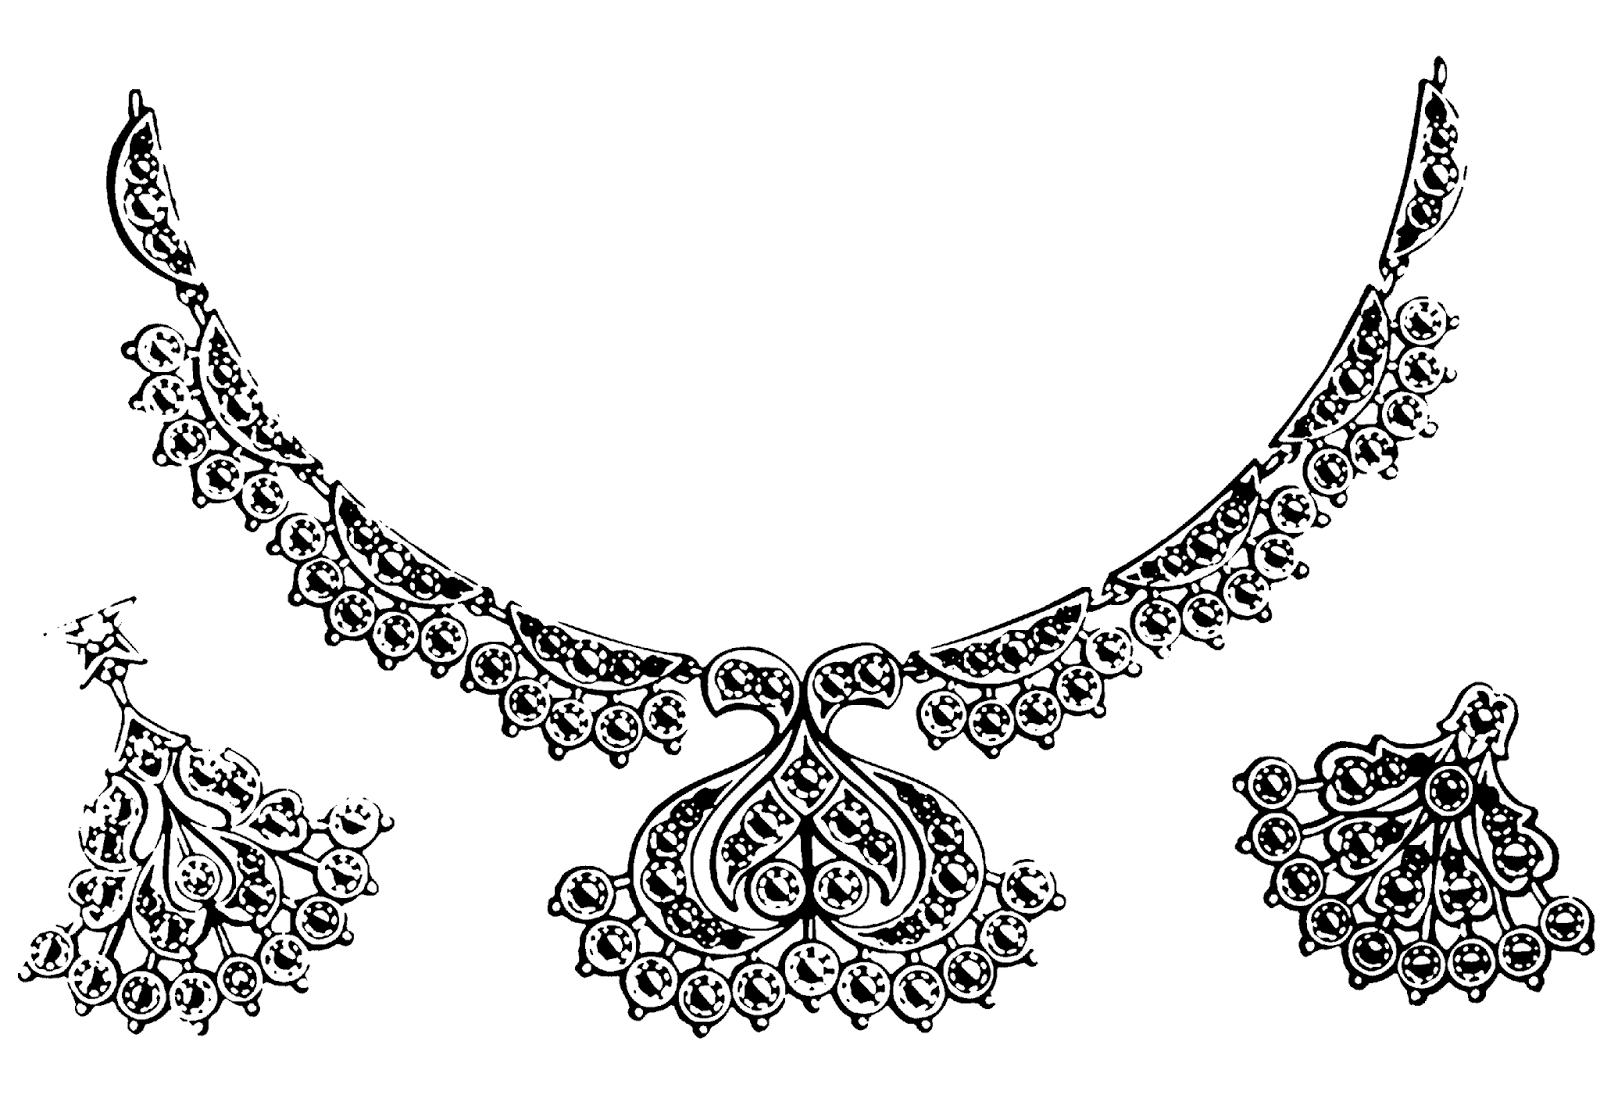 Free Jewelry Border Cliparts, Download Free Clip Art, Free